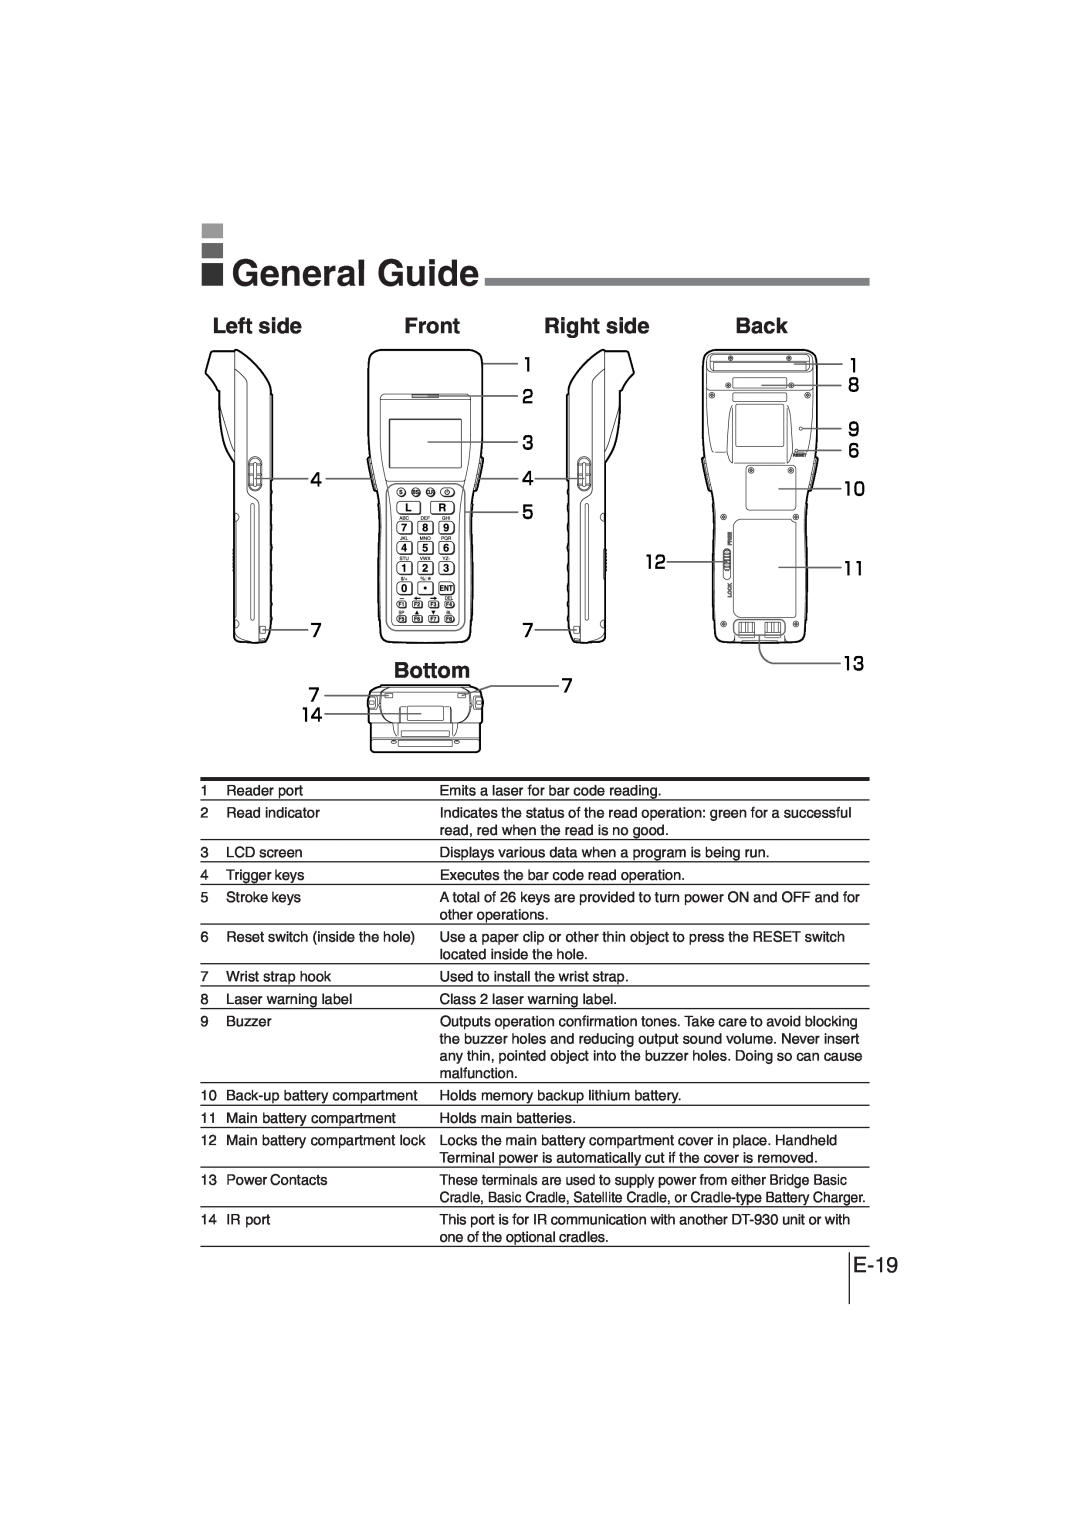 Casio DT-930 manual General Guide, Left side, Front, Right side, Bottom, E-19 